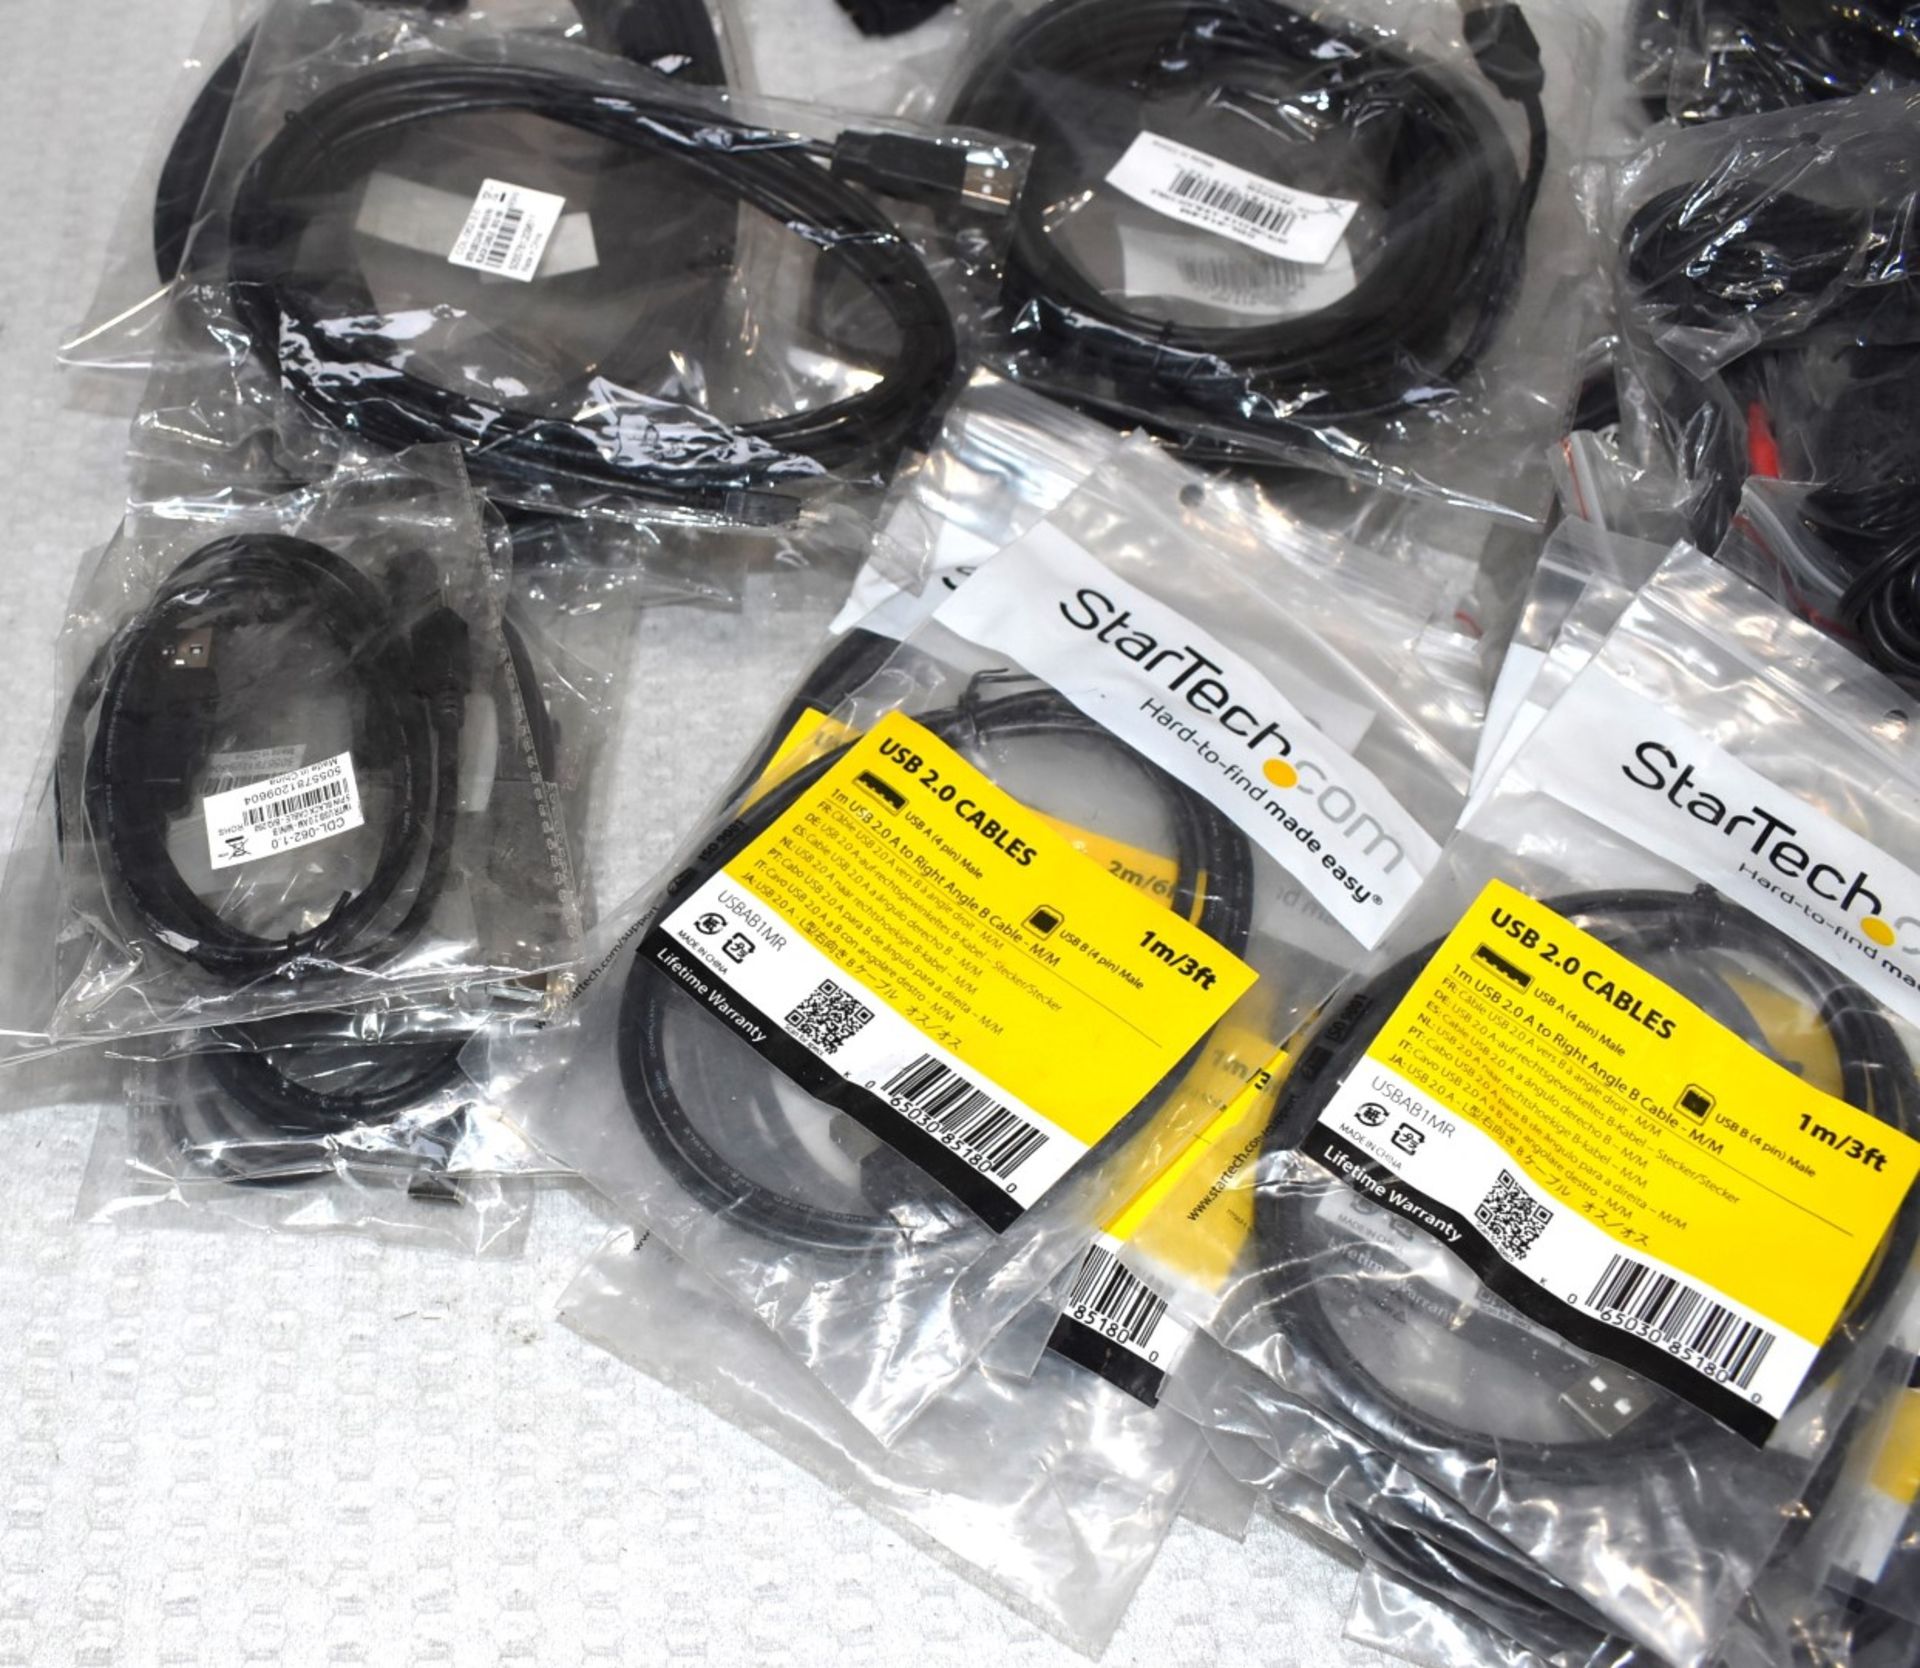 90 x Assorted Cables Including Various USB Connection Leads - New in Packets - Image 21 of 21